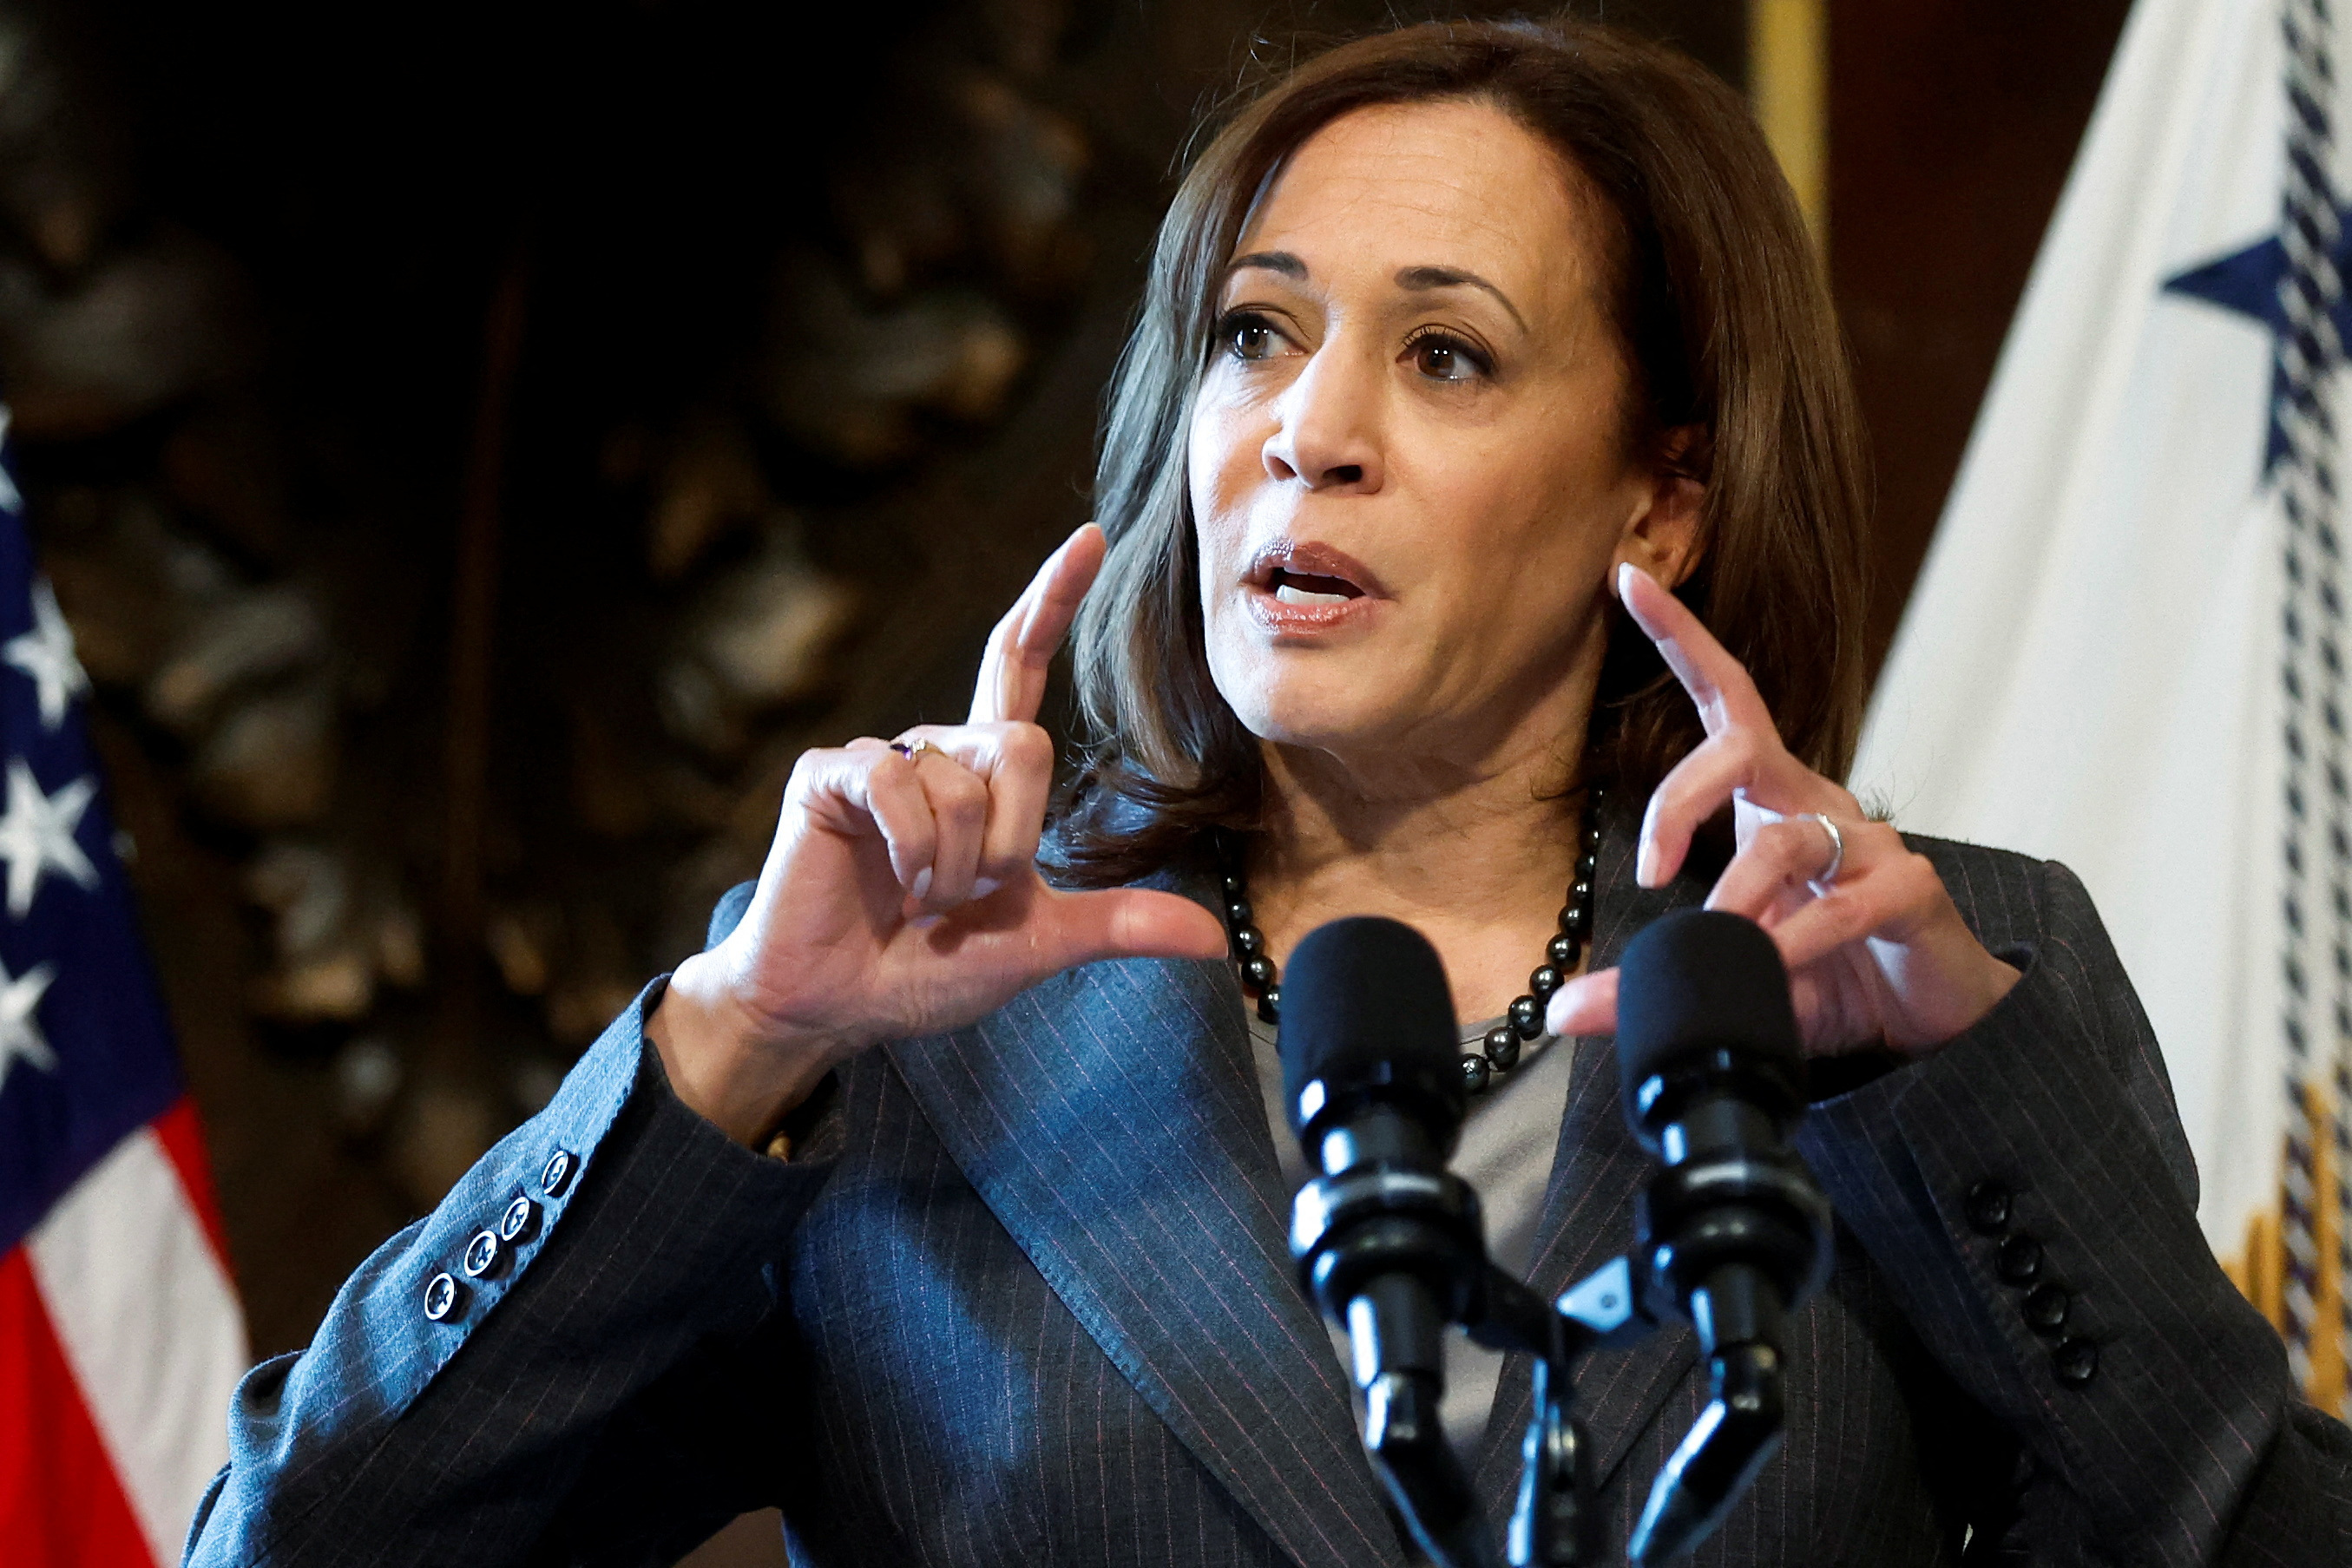 U.S. VP Harris highlights $4.2 bln private sector investment in Central America | Reuters